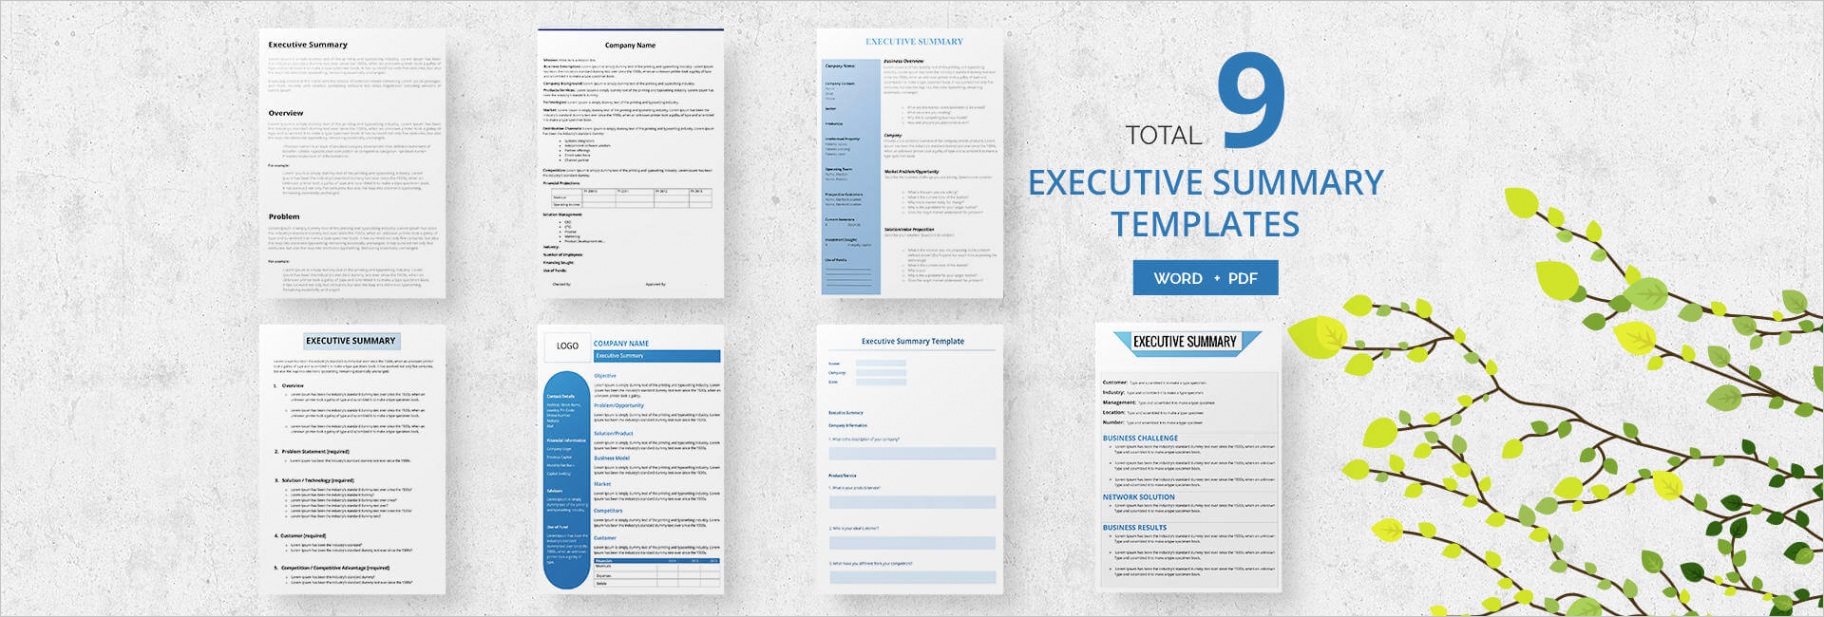 5 linkedin summary templates and tips to you the job